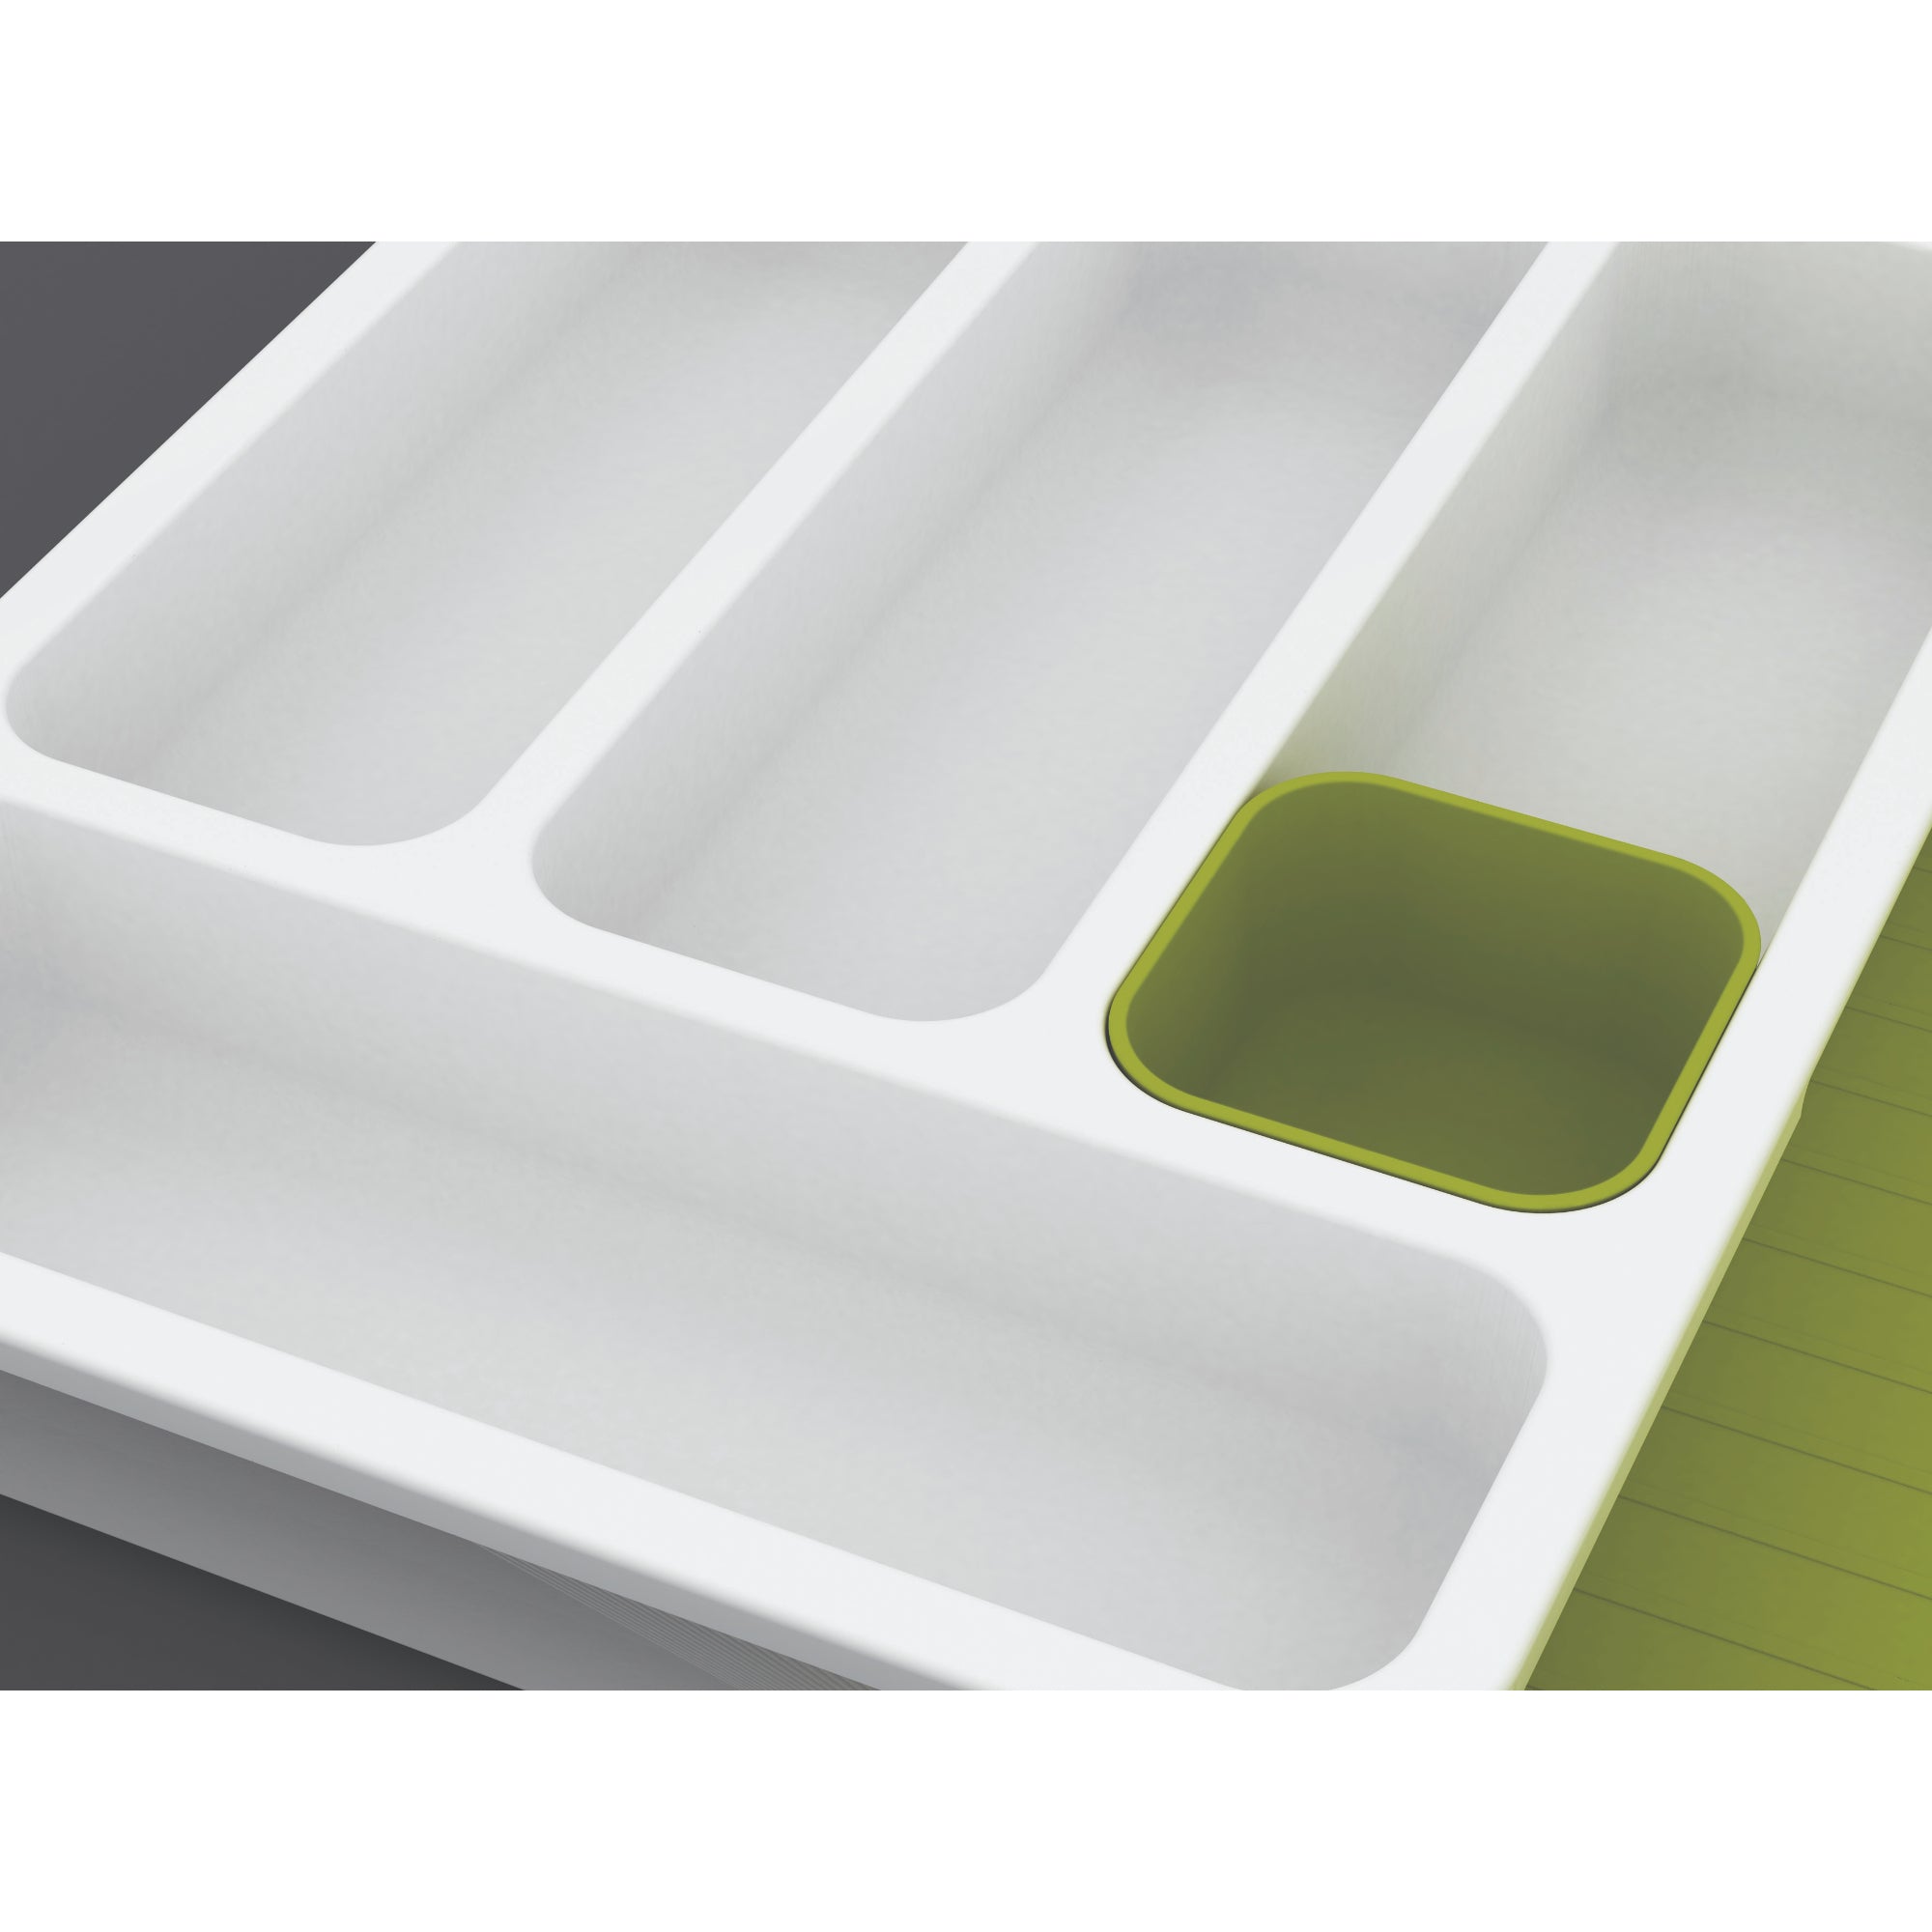 DrawerStore Cutlery Tray - White/Green